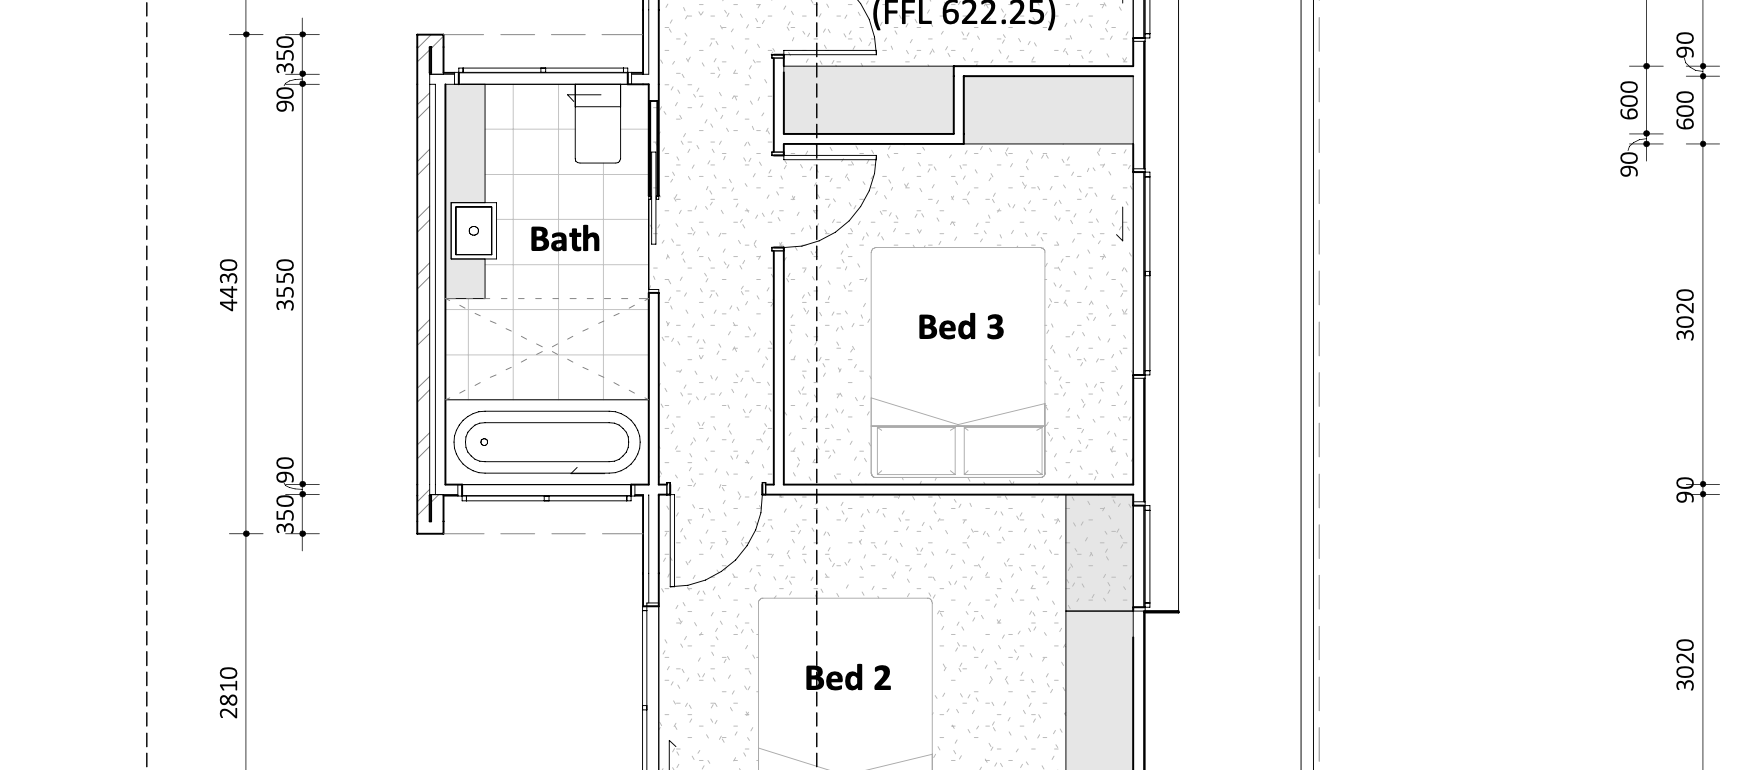 Do architectural drawings include plumbing plans